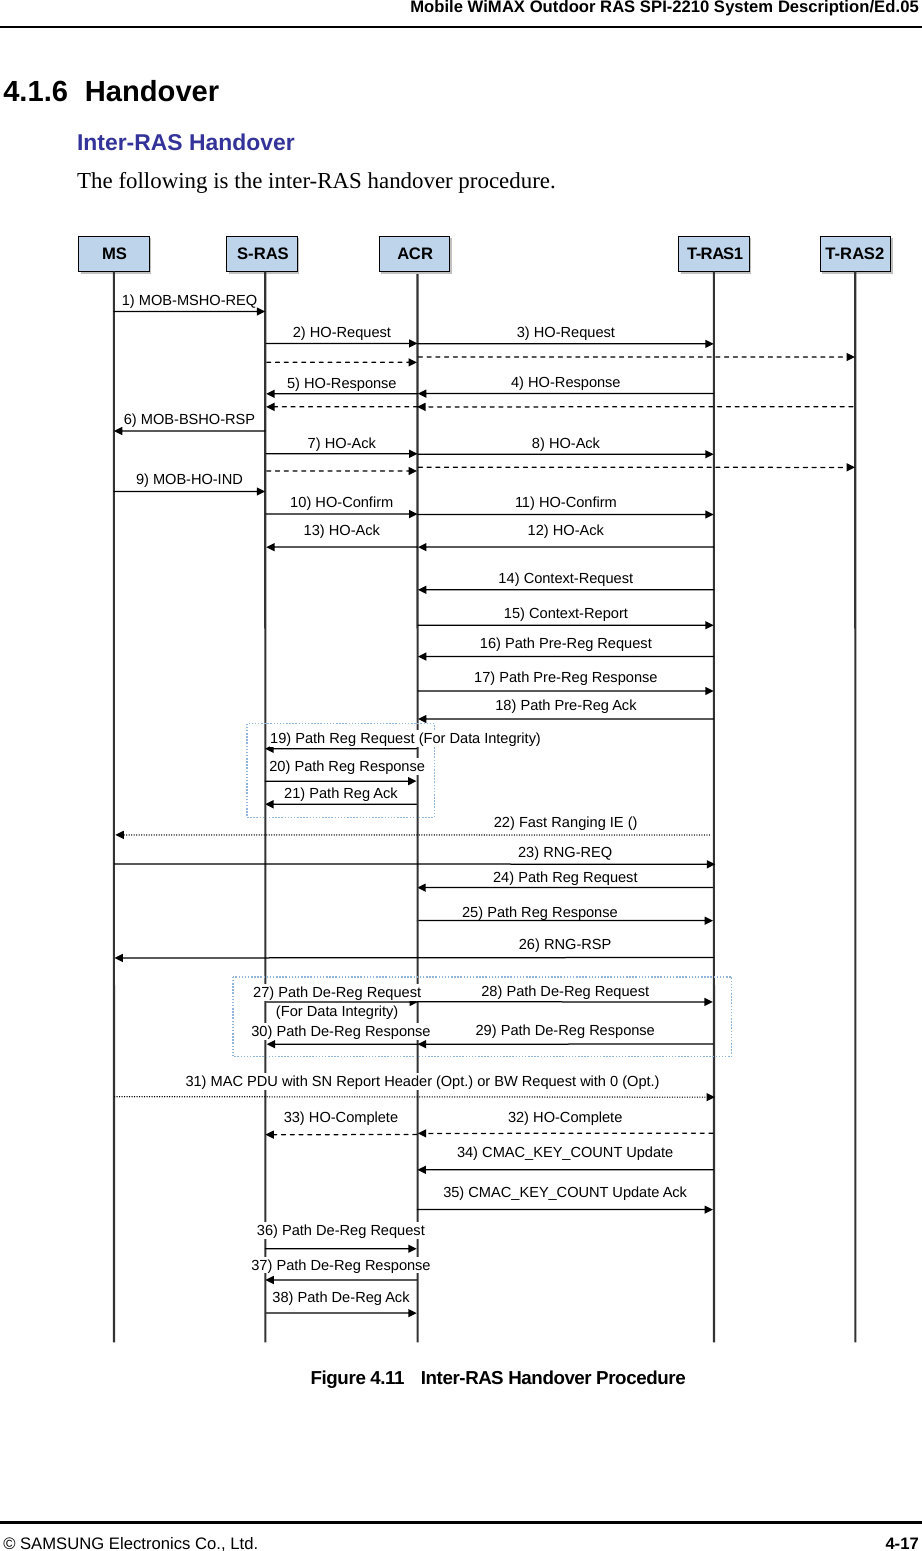   Mobile WiMAX Outdoor RAS SPI-2210 System Description/Ed.05 © SAMSUNG Electronics Co., Ltd.  4-17 4.1.6 Handover Inter-RAS Handover The following is the inter-RAS handover procedure.    Figure 4.11    Inter-RAS Handover Procedure 25) Path Reg Response 24) Path Reg Request 21) Path Reg Ack MS  S-RAS  T-RAS1  T-RAS21) MOB-MSHO-REQ ACR2) HO-Request  3) HO-Request 4) HO-Response5) HO-Response7) HO-Ack 9) MOB-HO-IND 10) HO-Confirm 14) Context-Request15) Context-Report12) HO-Ack 13) HO-Ack 23) RNG-REQ 26) RNG-RSP 31) MAC PDU with SN Report Header (Opt.) or BW Request with 0 (Opt.) 32) HO-Complete 33) HO-Complete 36) Path De-Reg Request37) Path De-Reg Response6) MOB-BSHO-RSP 8) HO-Ack 11) HO-Confirm 16) Path Pre-Reg Request20) Path Reg Response 17) Path Pre-Reg Response18) Path Pre-Reg Ack 27) Path De-Reg Request   (For Data Integrity)  30) Path De-Reg Response28) Path De-Reg Request29) Path De-Reg Response22) Fast Ranging IE () 34) CMAC_KEY_COUNT Update35) CMAC_KEY_COUNT Update Ack 38) Path De-Reg Ack 19) Path Reg Request (For Data Integrity)